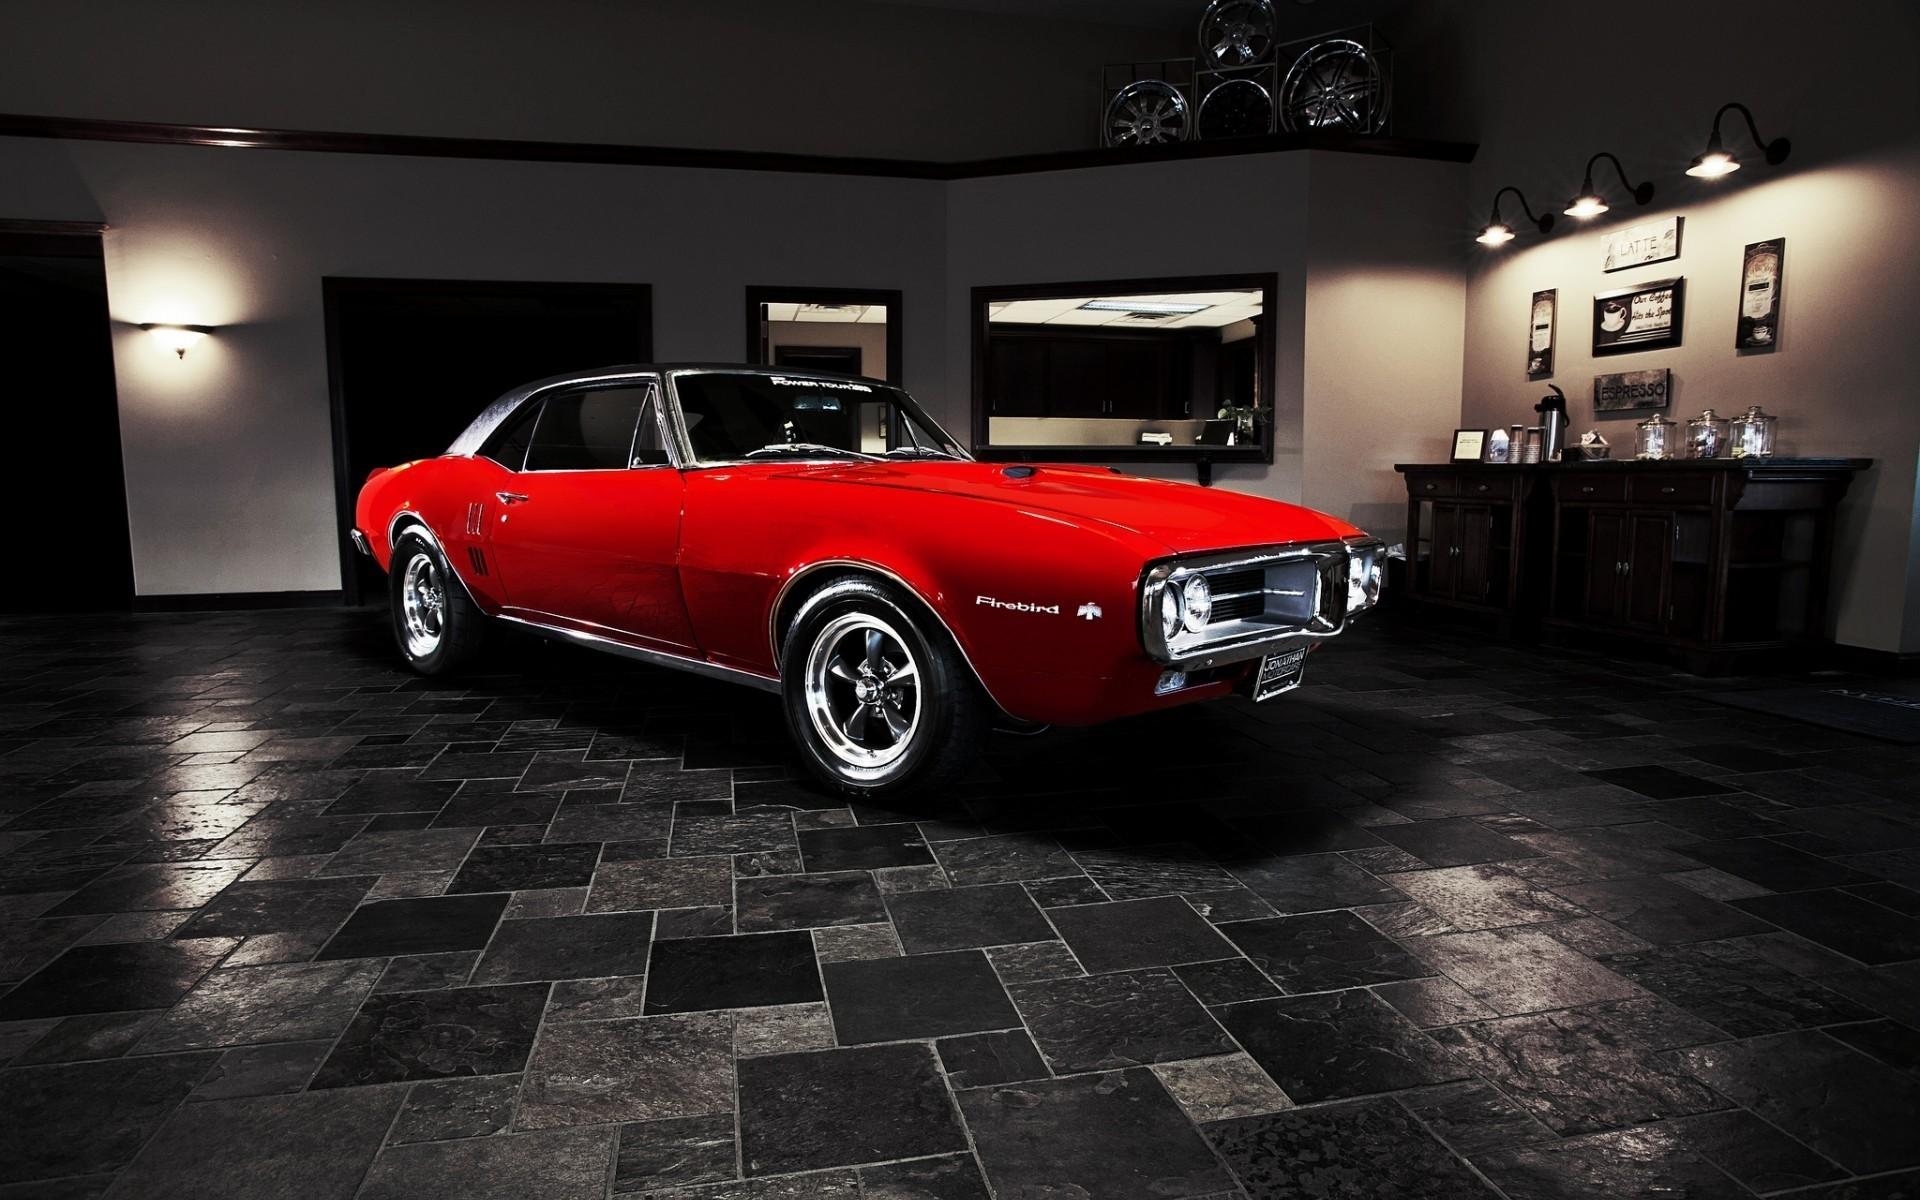 Pontiac Firebird 1967. Android wallpaper for free